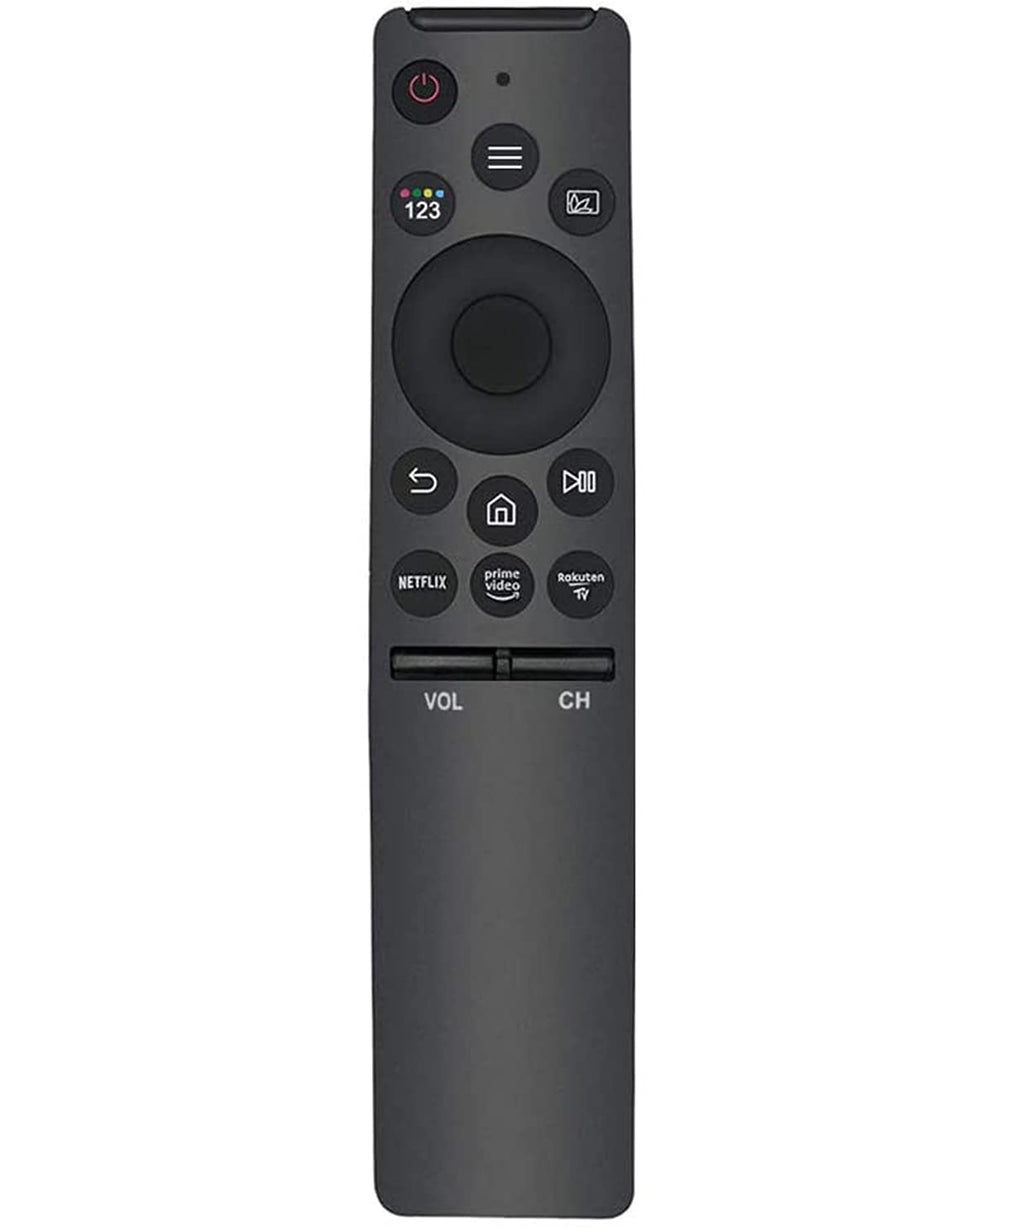  [AUSTRALIA] - Universal Remote Control Replacement for Samsung Smart-TV LCD LED UHD QLED TVs, with Netflix, Prime Video Buttons